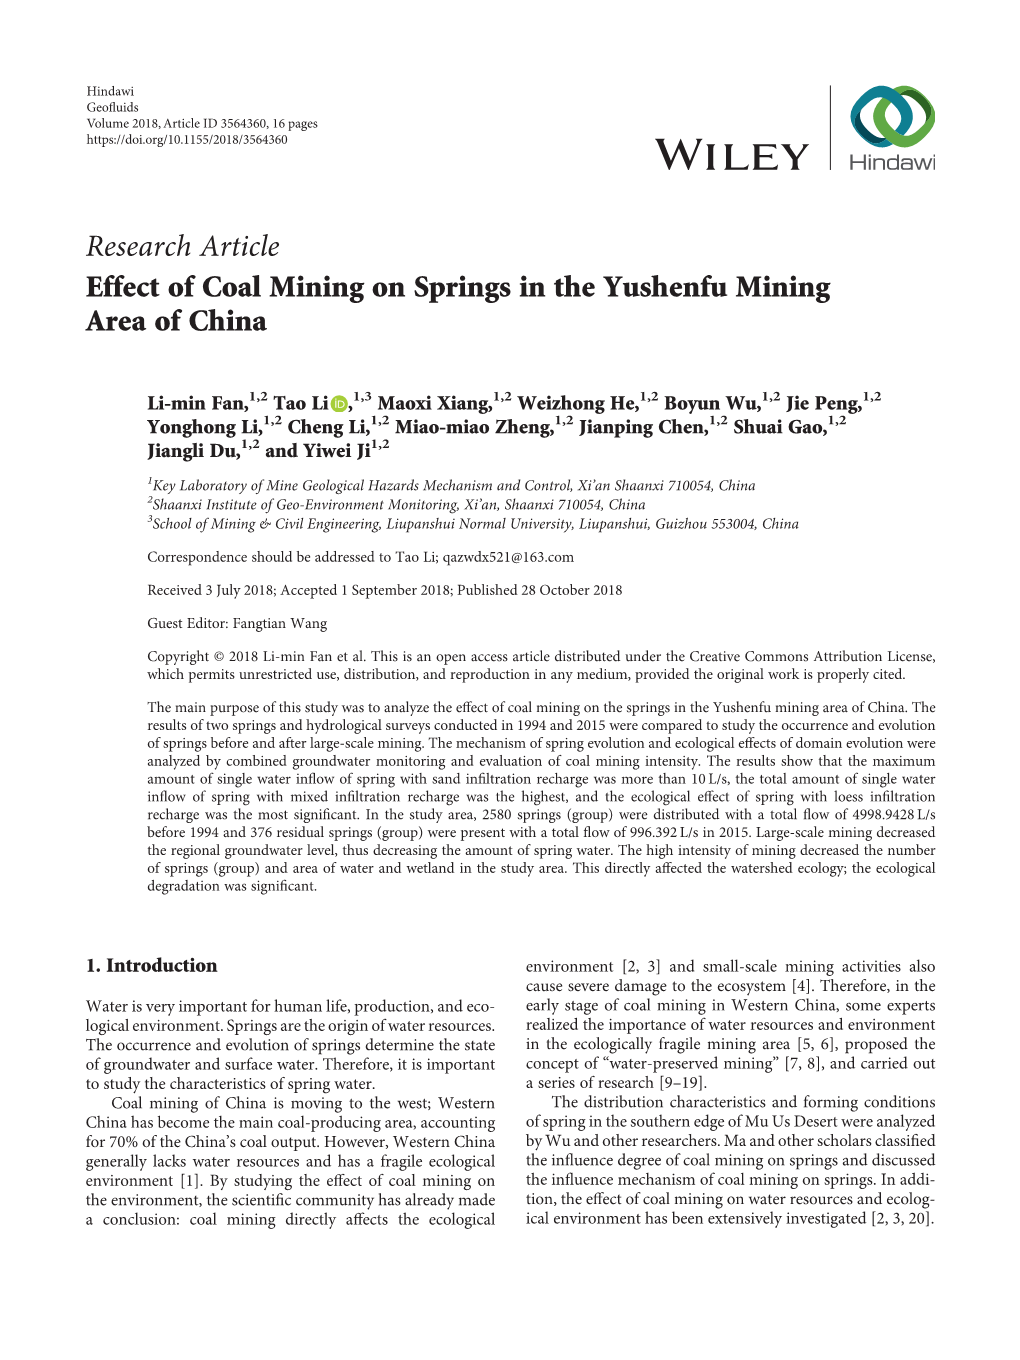 Research Article Effect of Coal Mining on Springs in the Yushenfu Mining Area of China